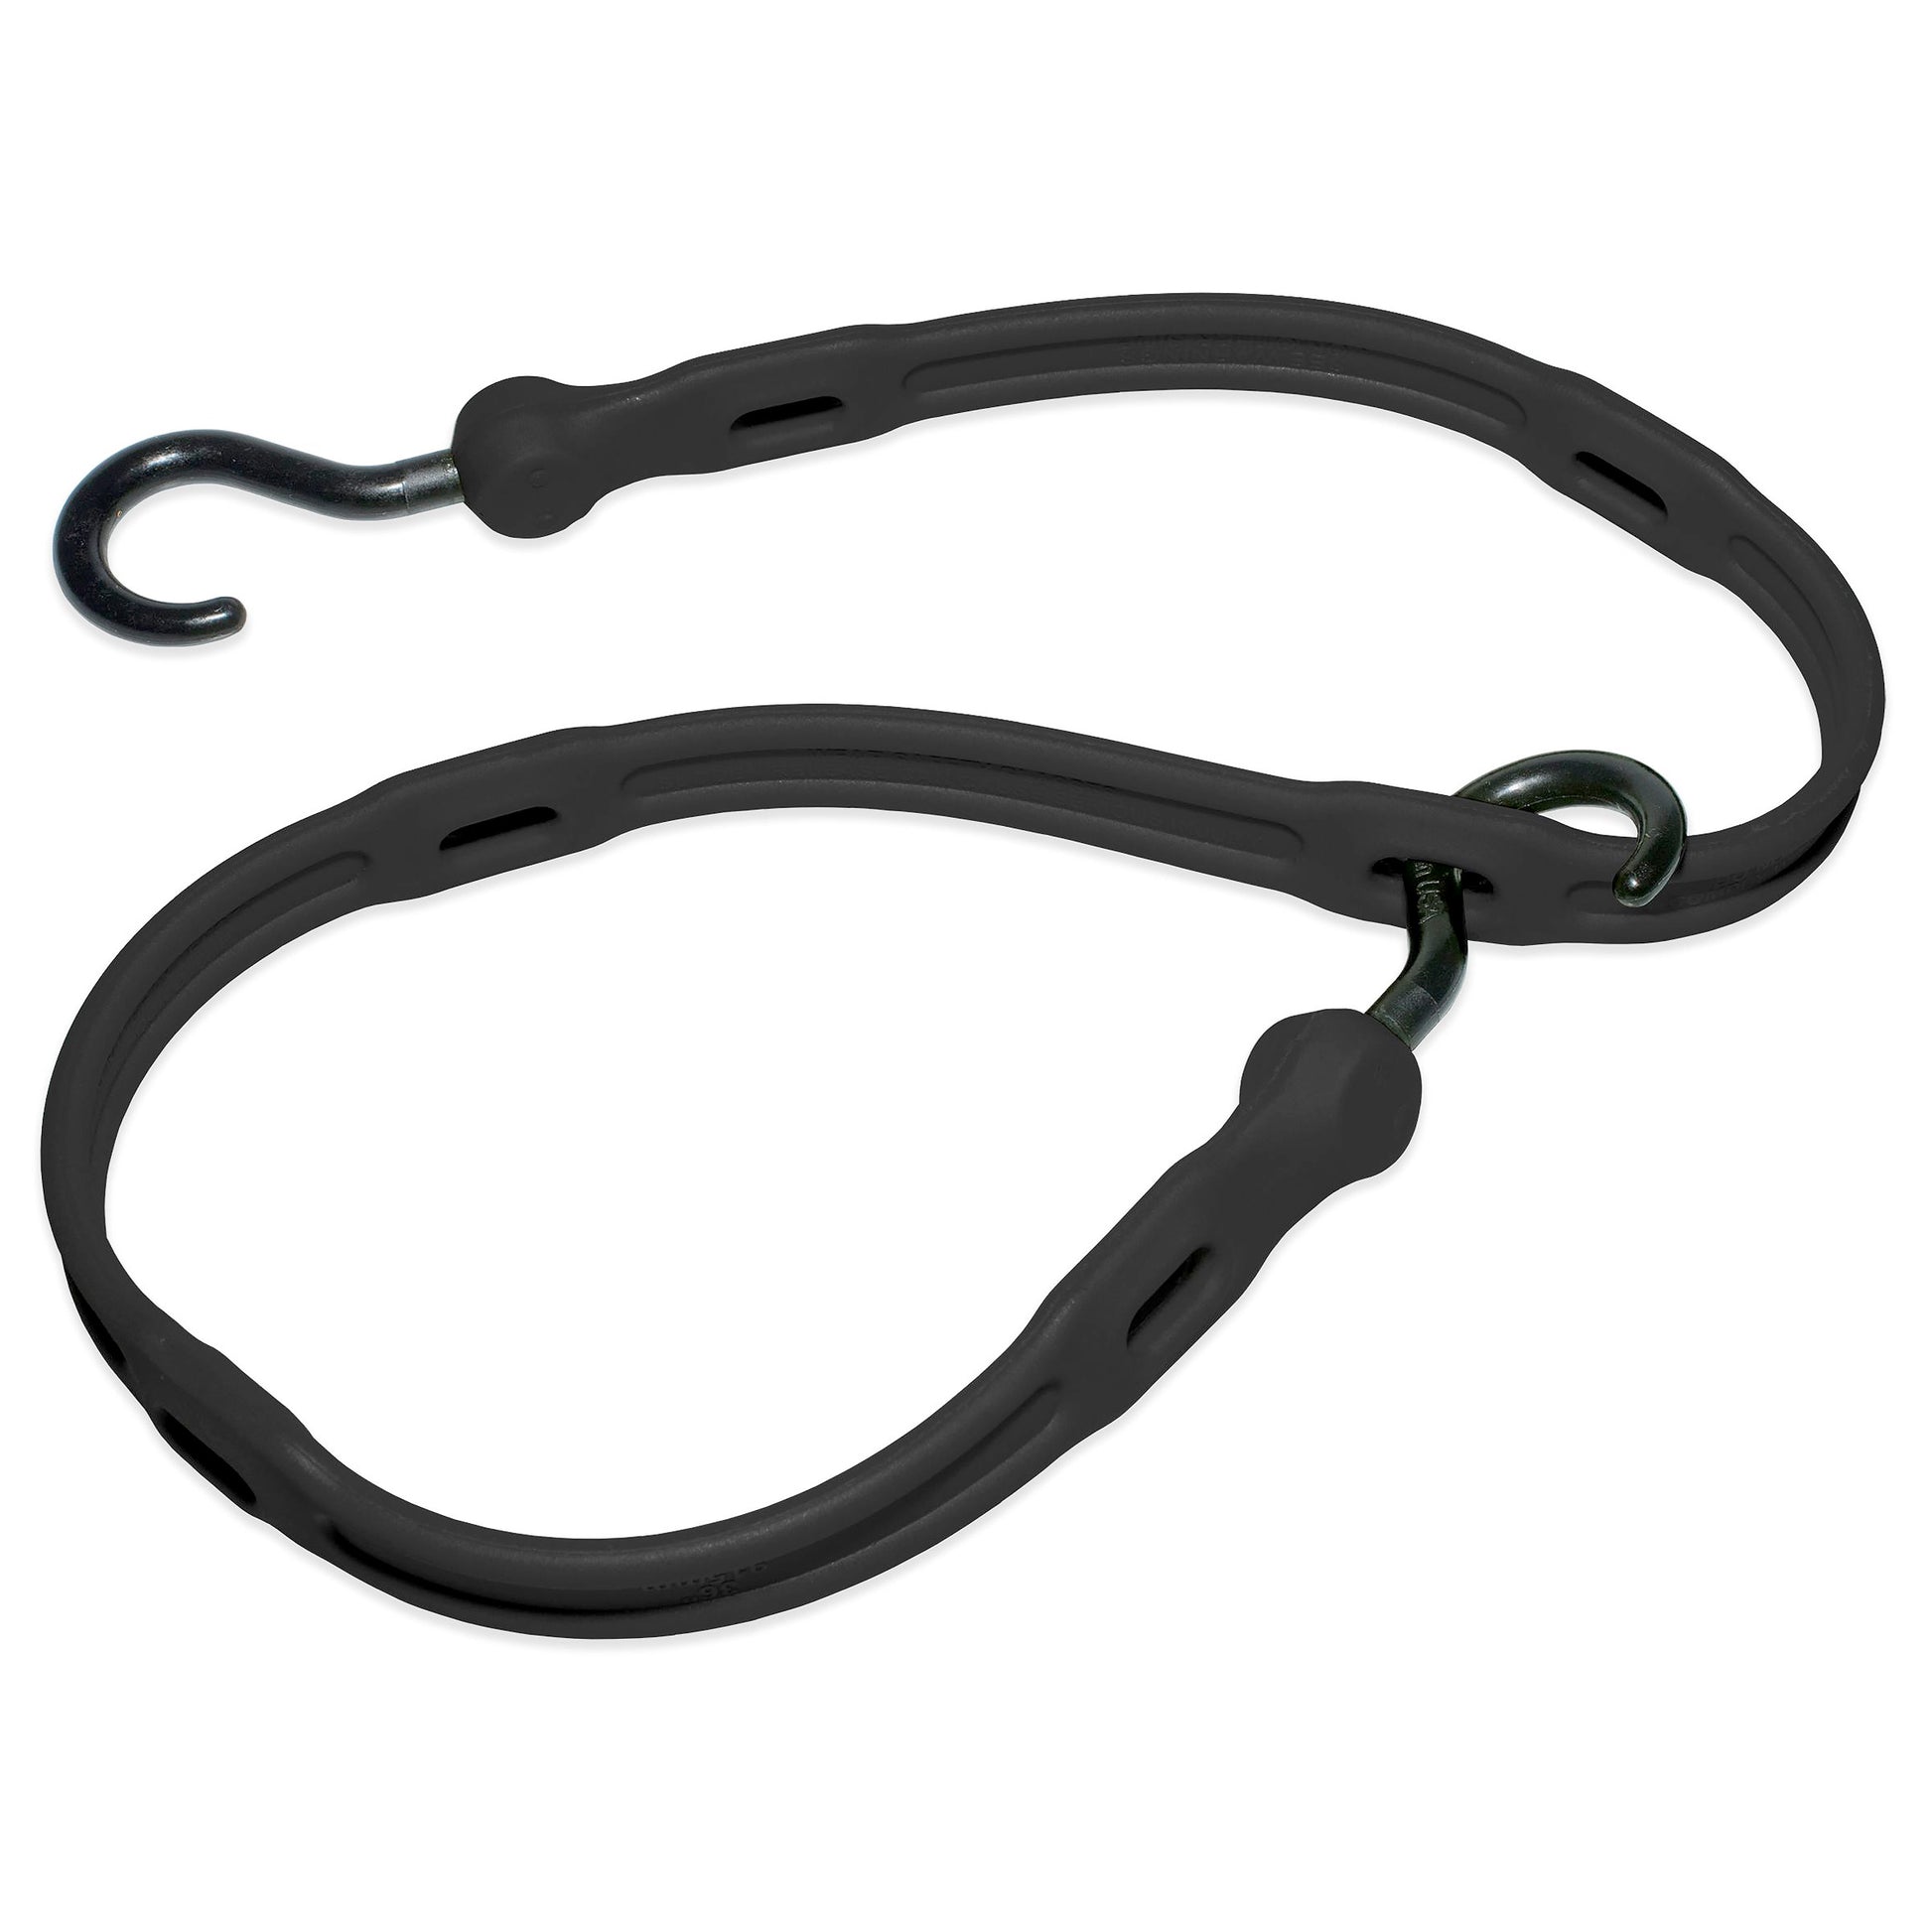 The Perfect Bungee Adjust-A-Strap Black Adjustable Bungee Cord